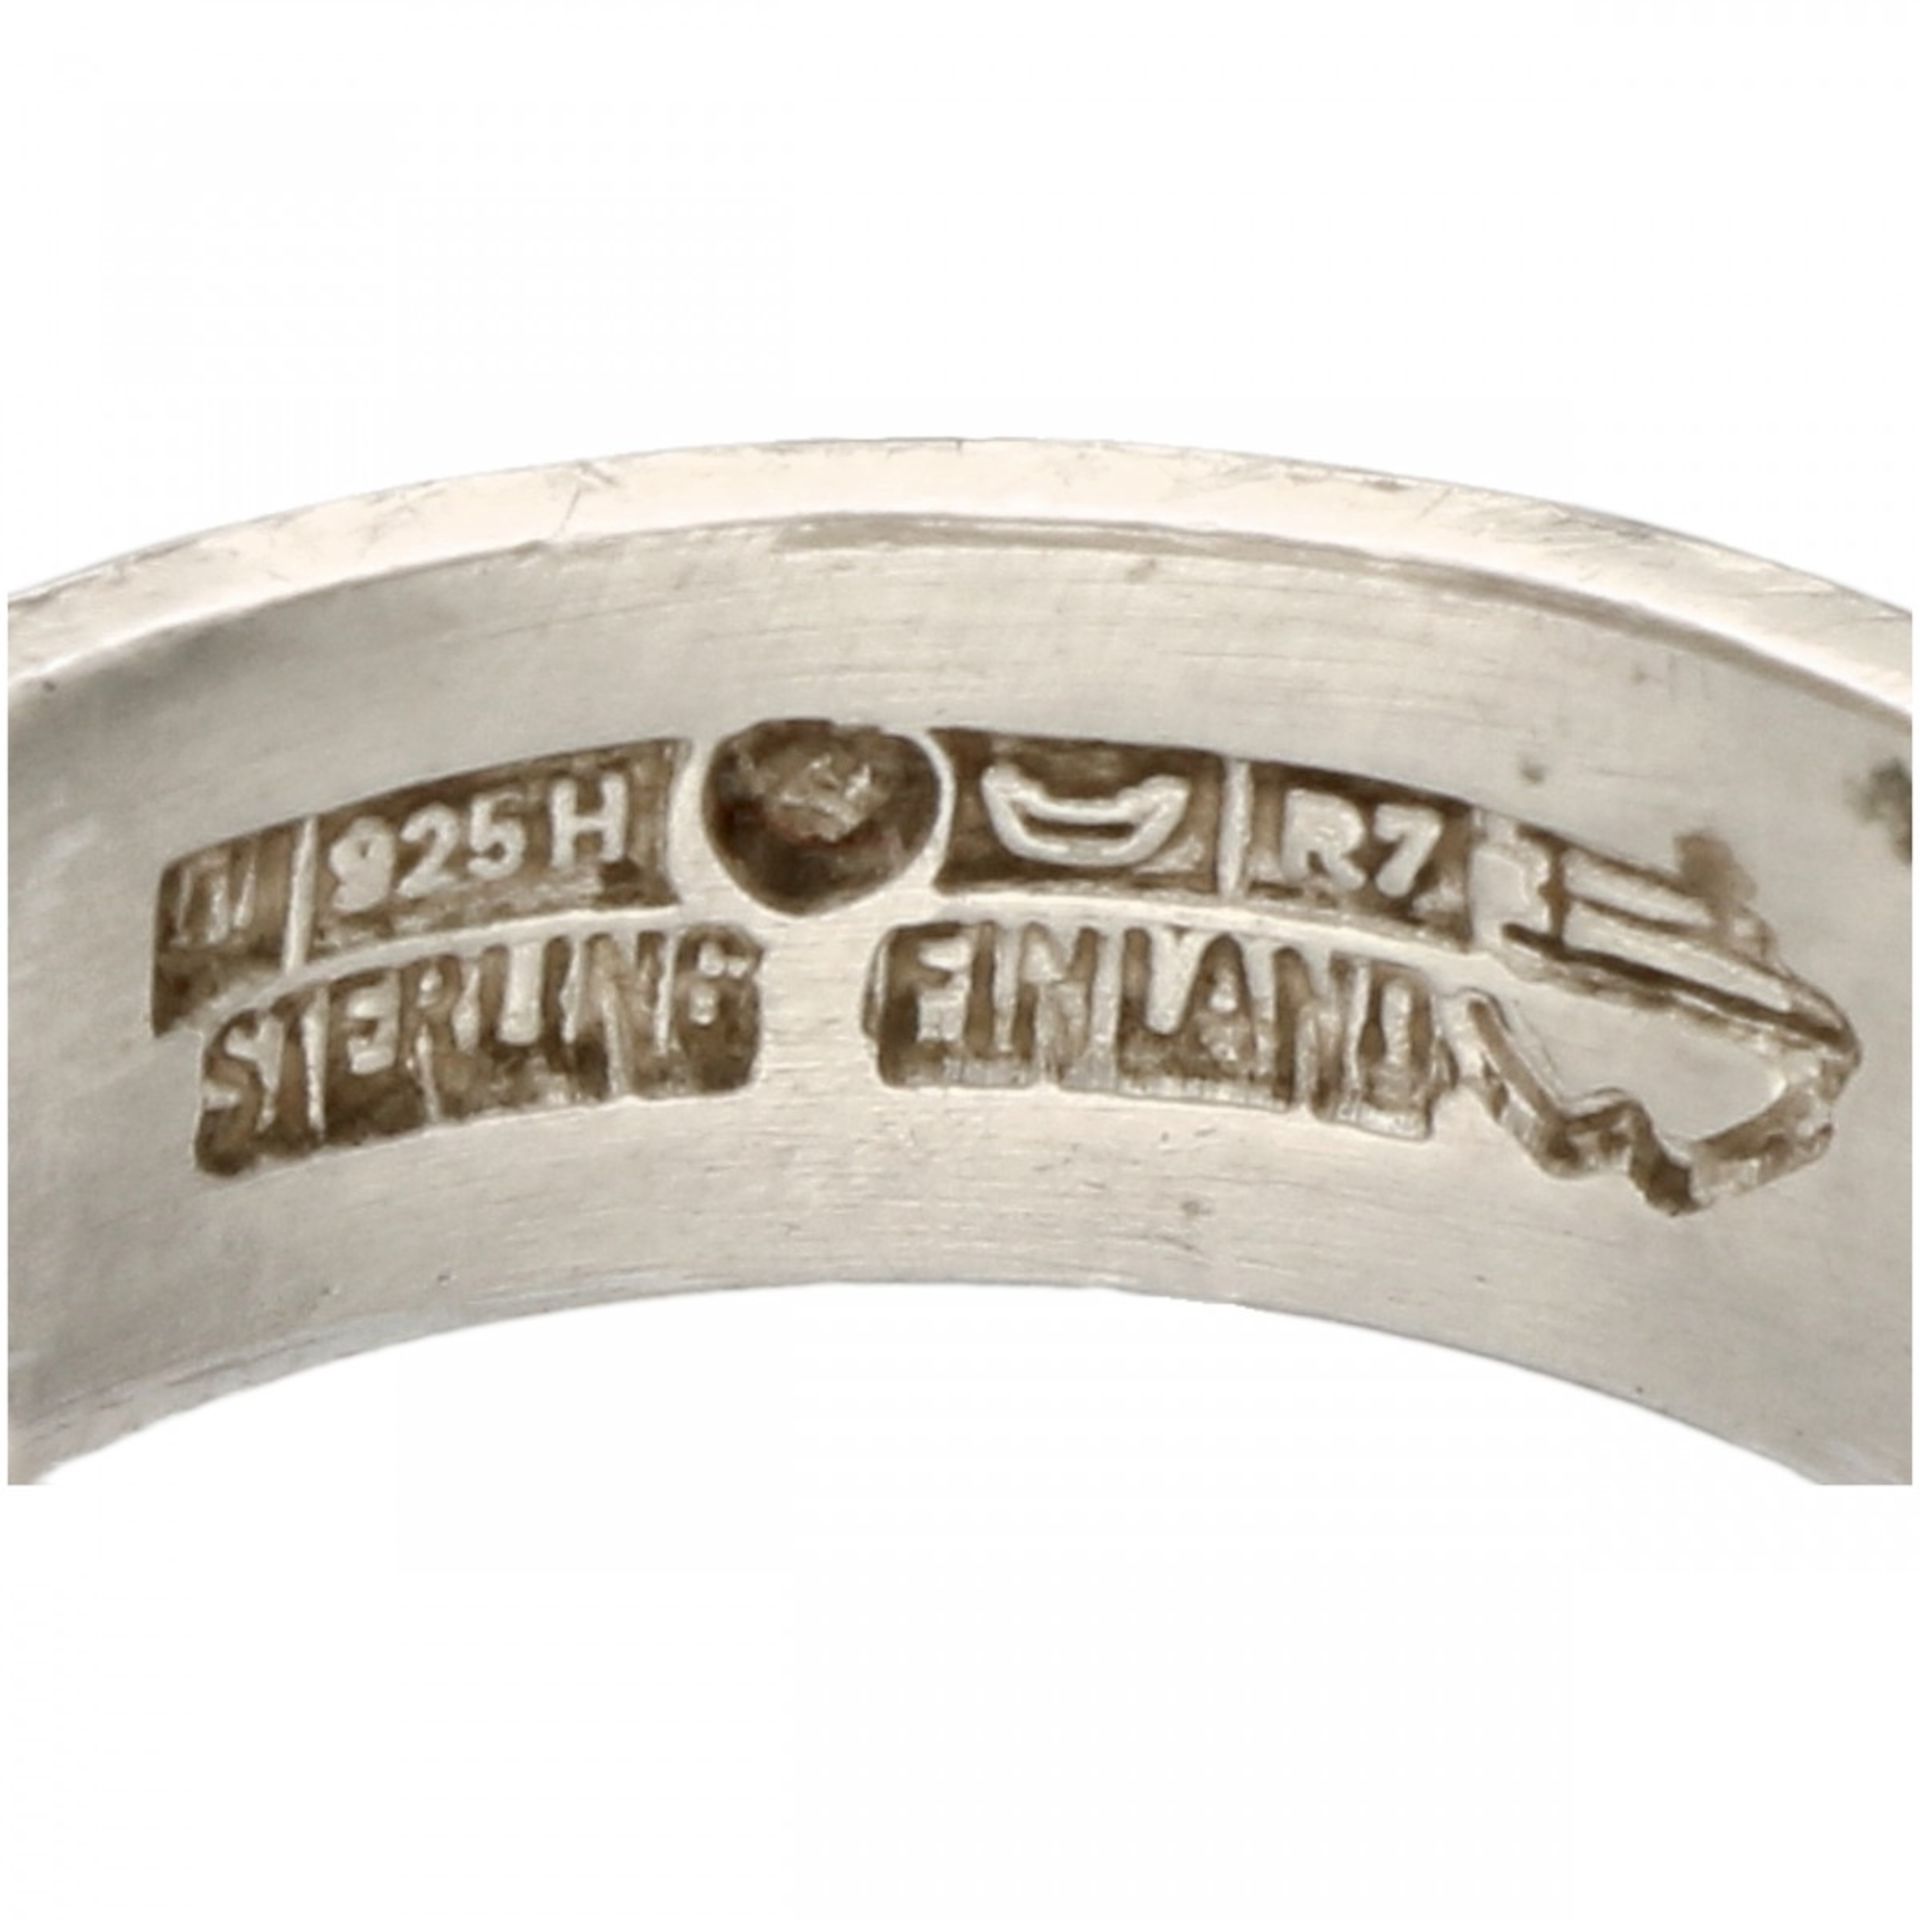 Zilveren Lapponia Aires ring - 925/1000. - Image 3 of 3